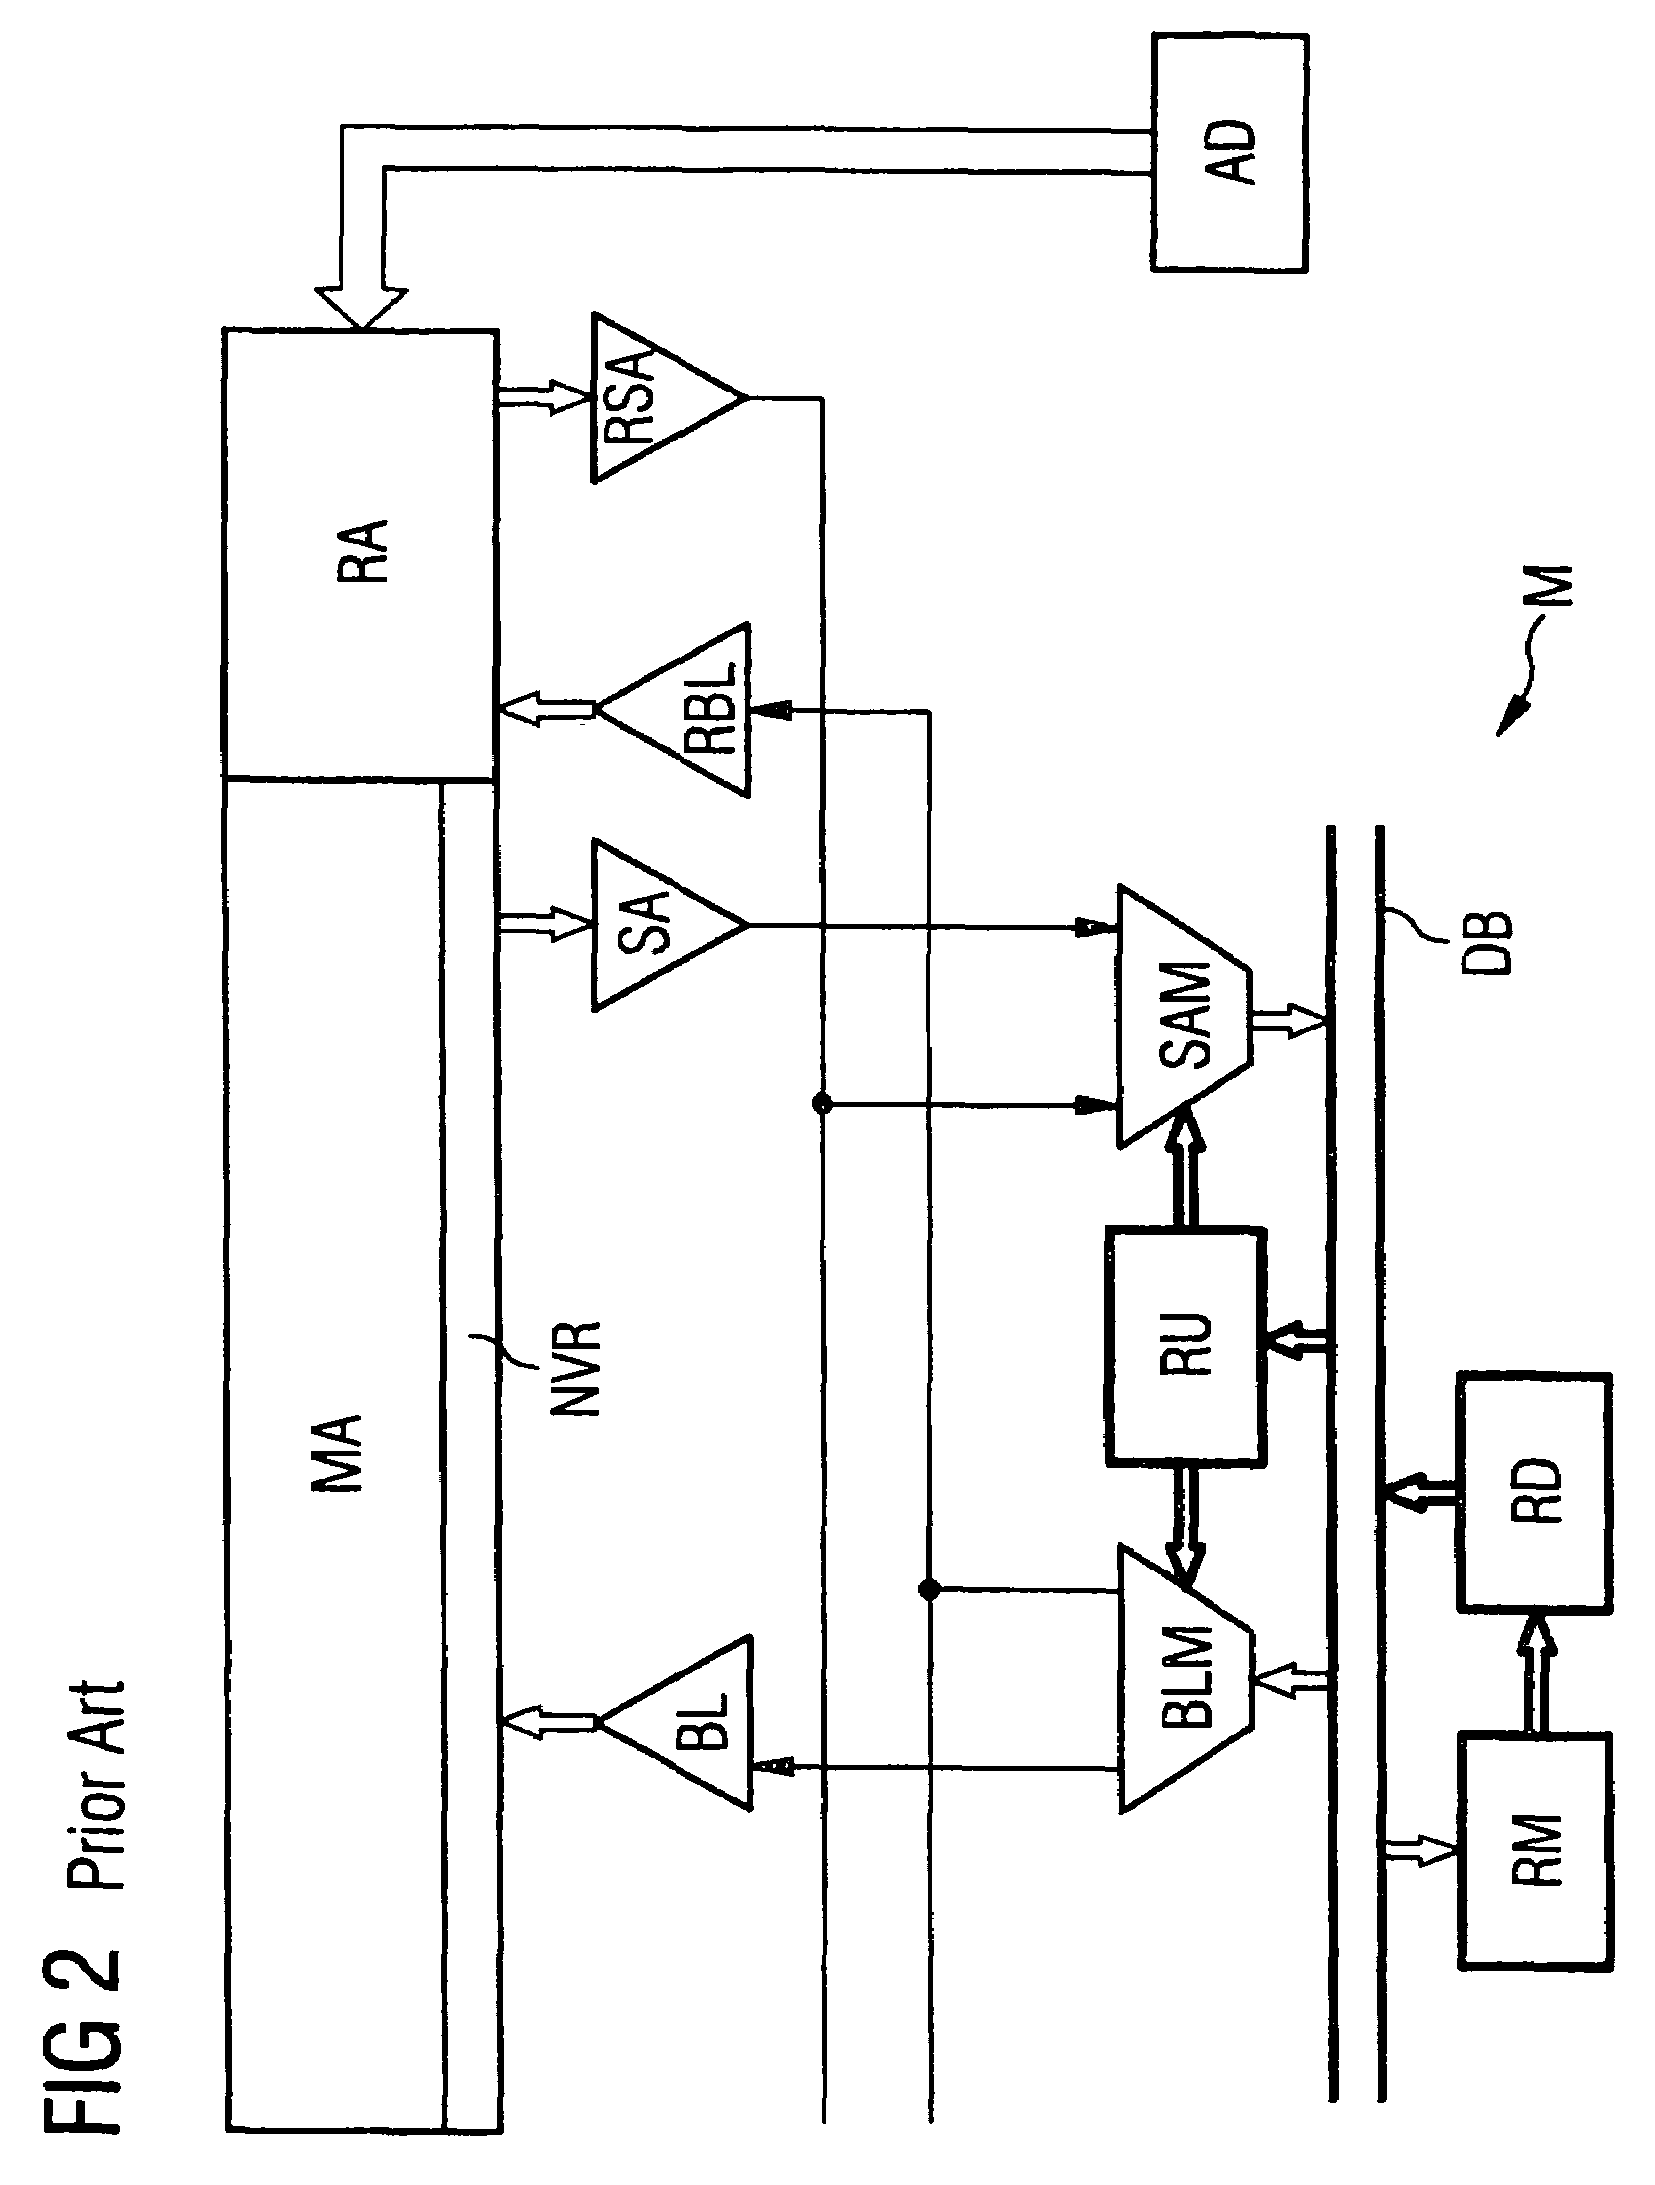 Semiconductor memory device having a redundancy information memory directly connected to a redundancy control circuit